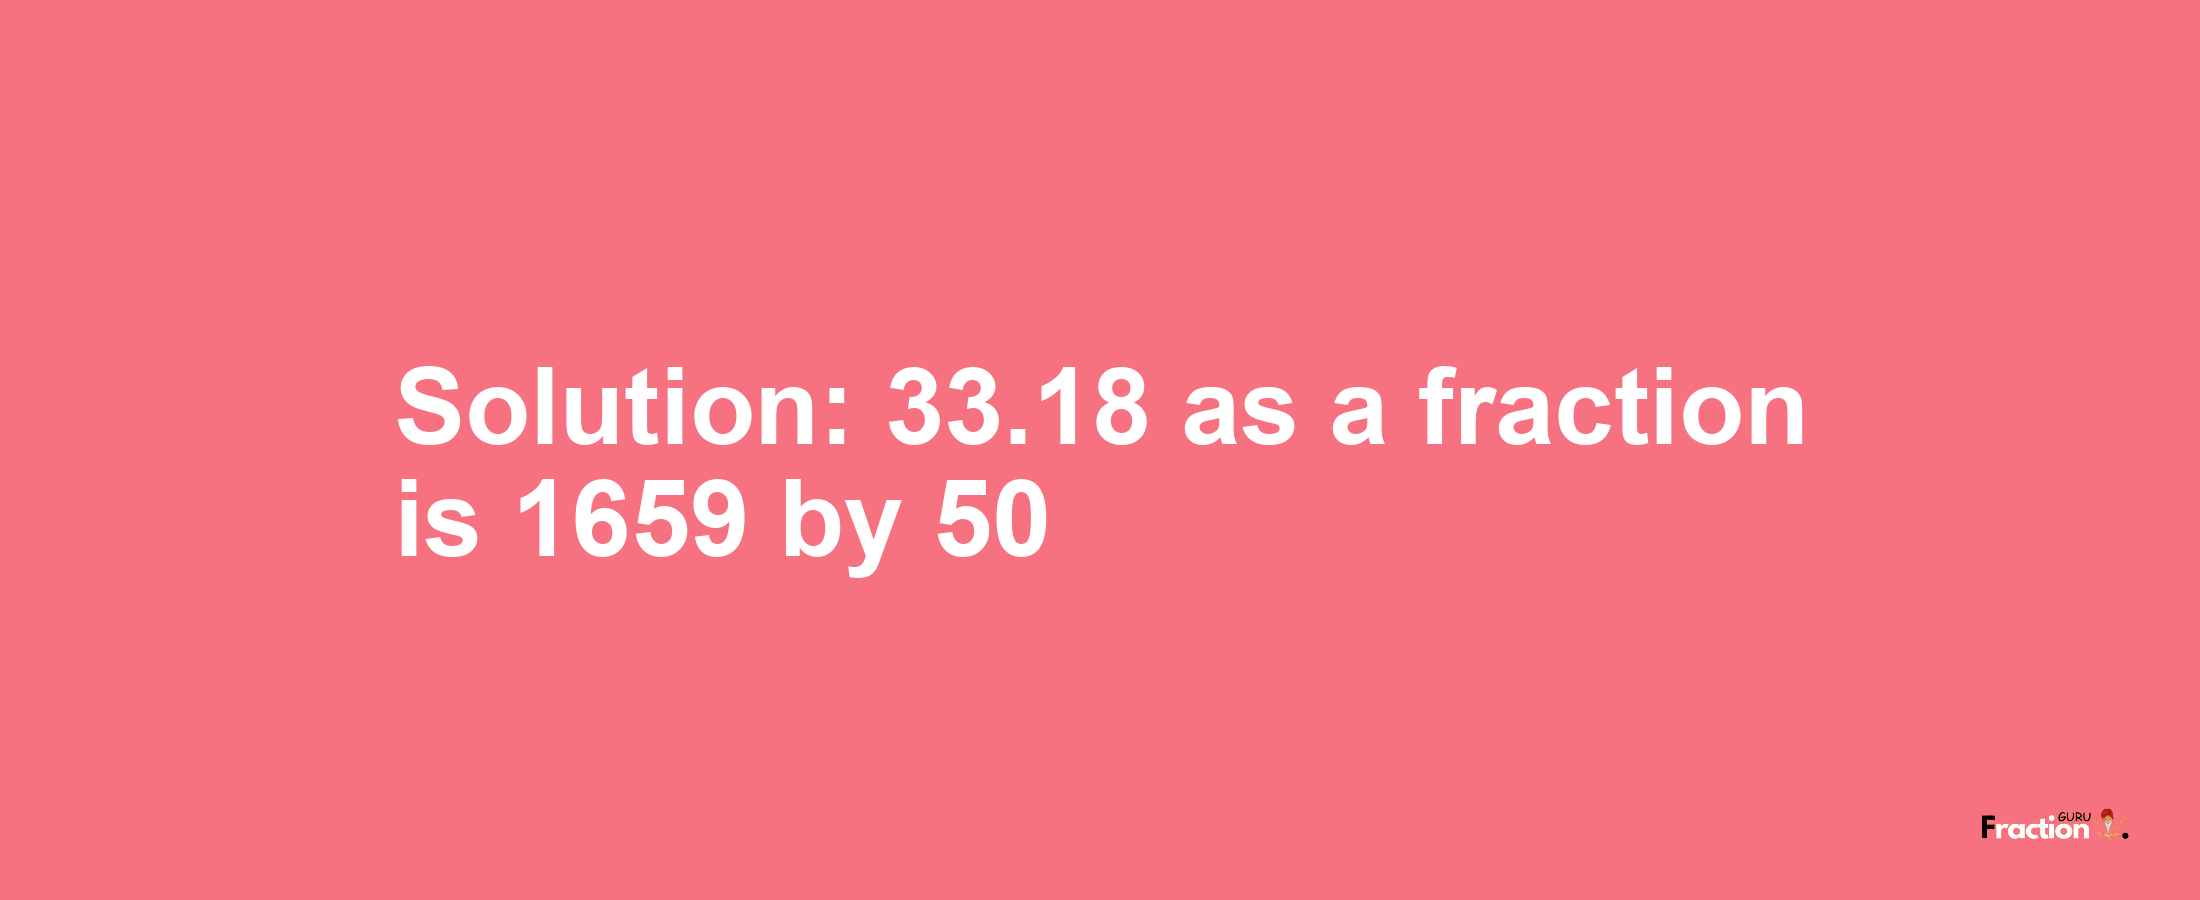 Solution:33.18 as a fraction is 1659/50